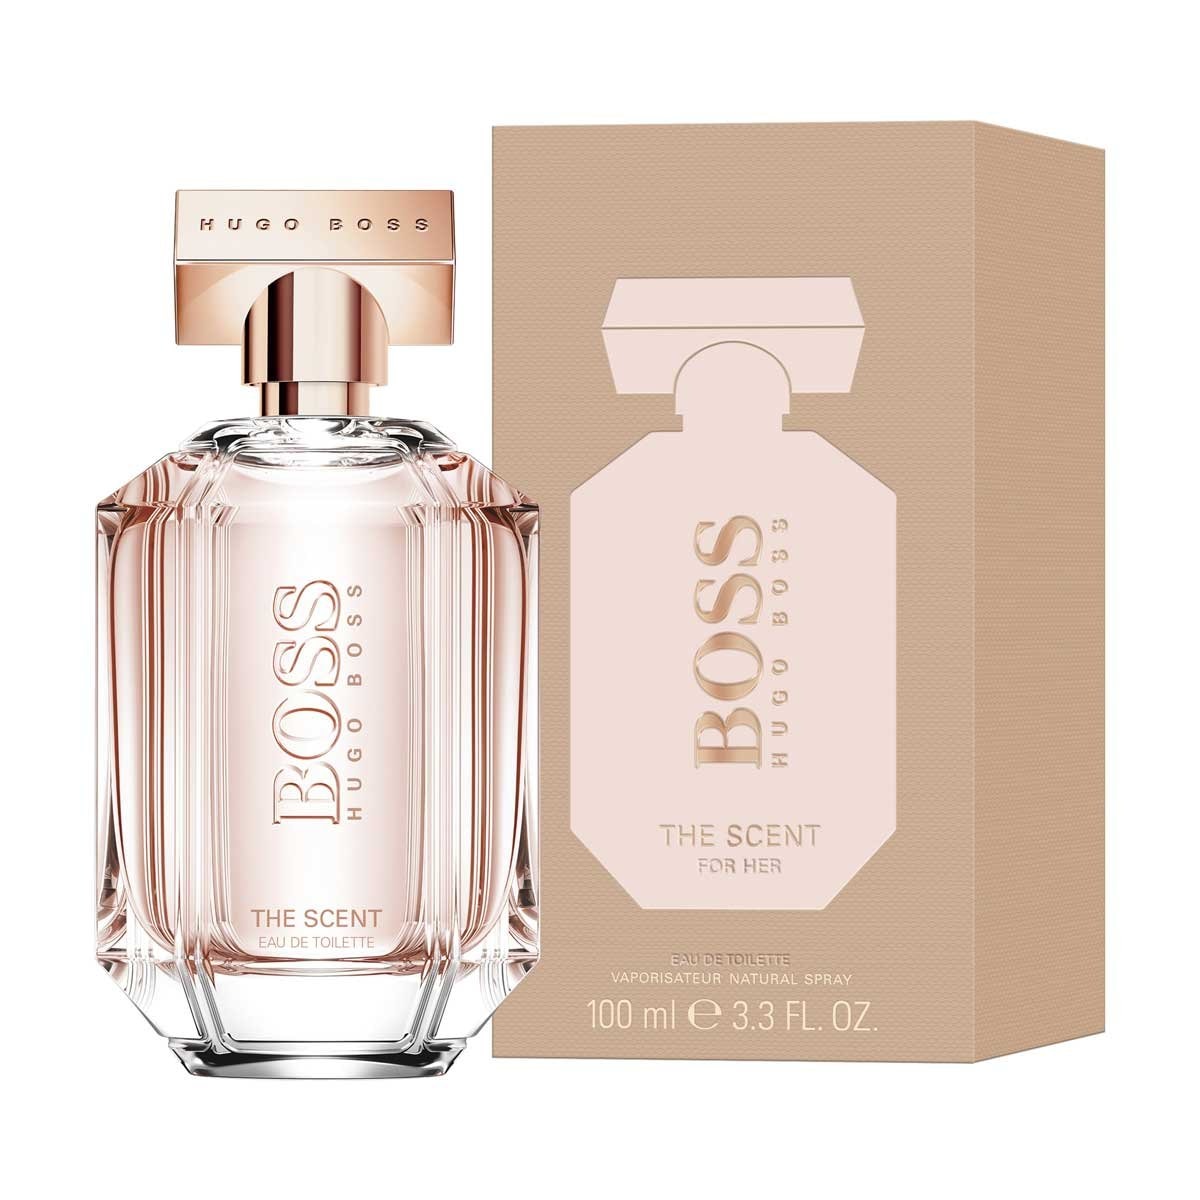 Fragancia dama the scent for her edt 100ml boss - Sears